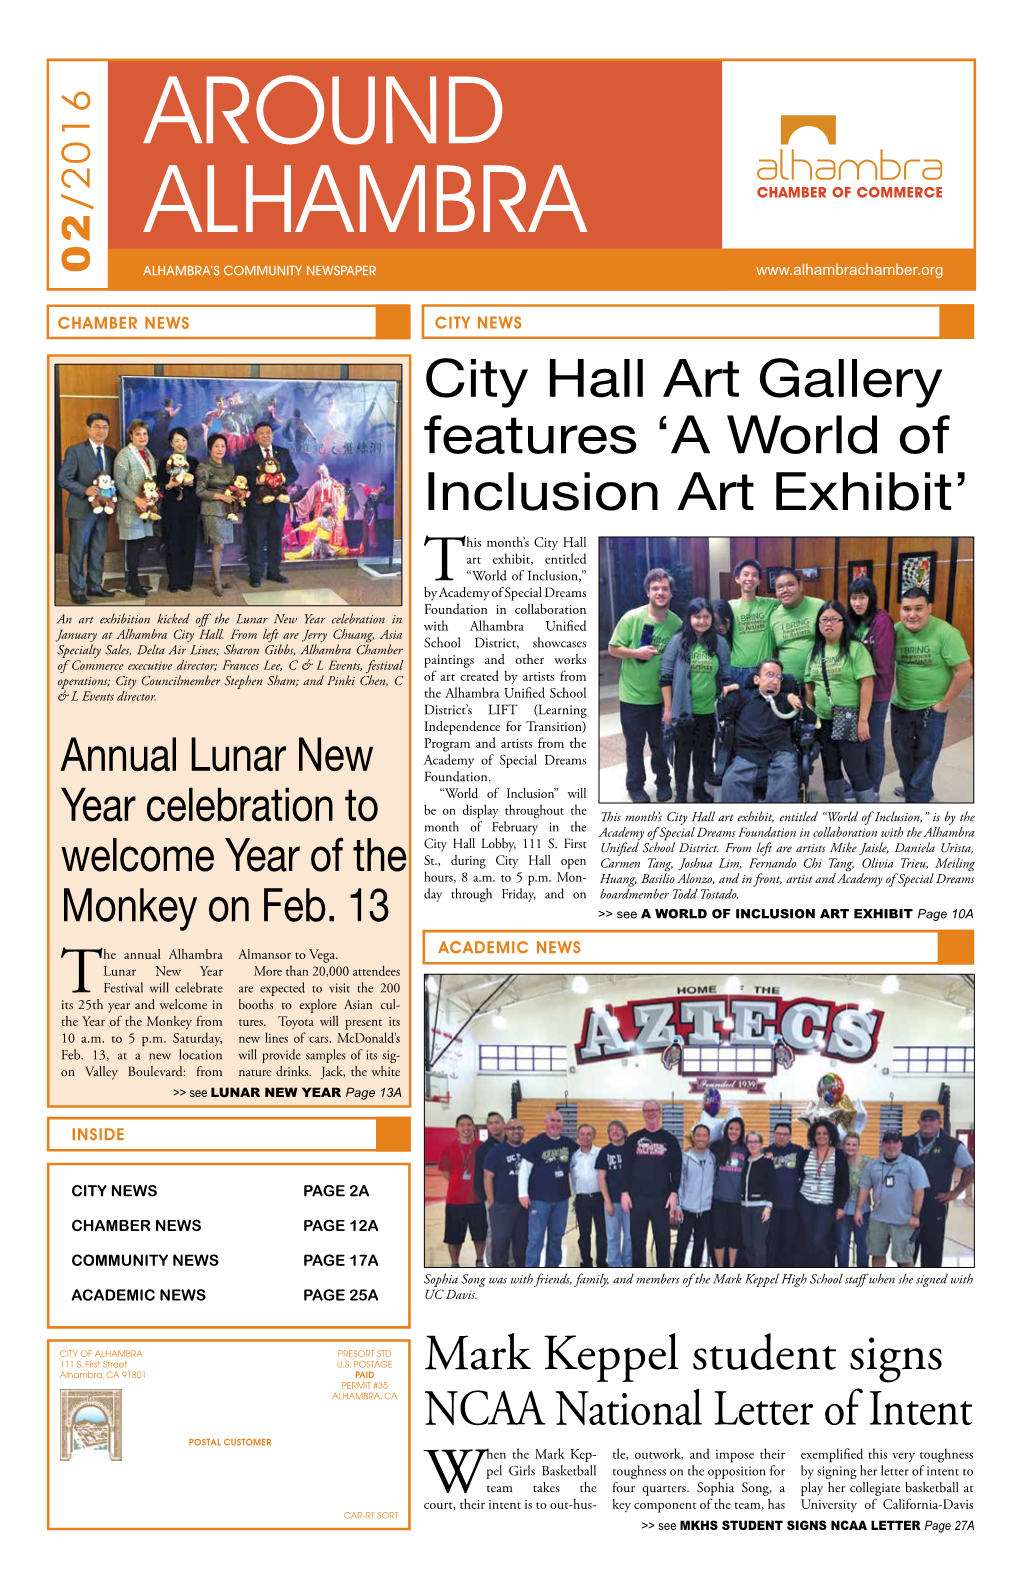 City Hall Art Gallery Features 'A World of Inclusion Art Exhibit'